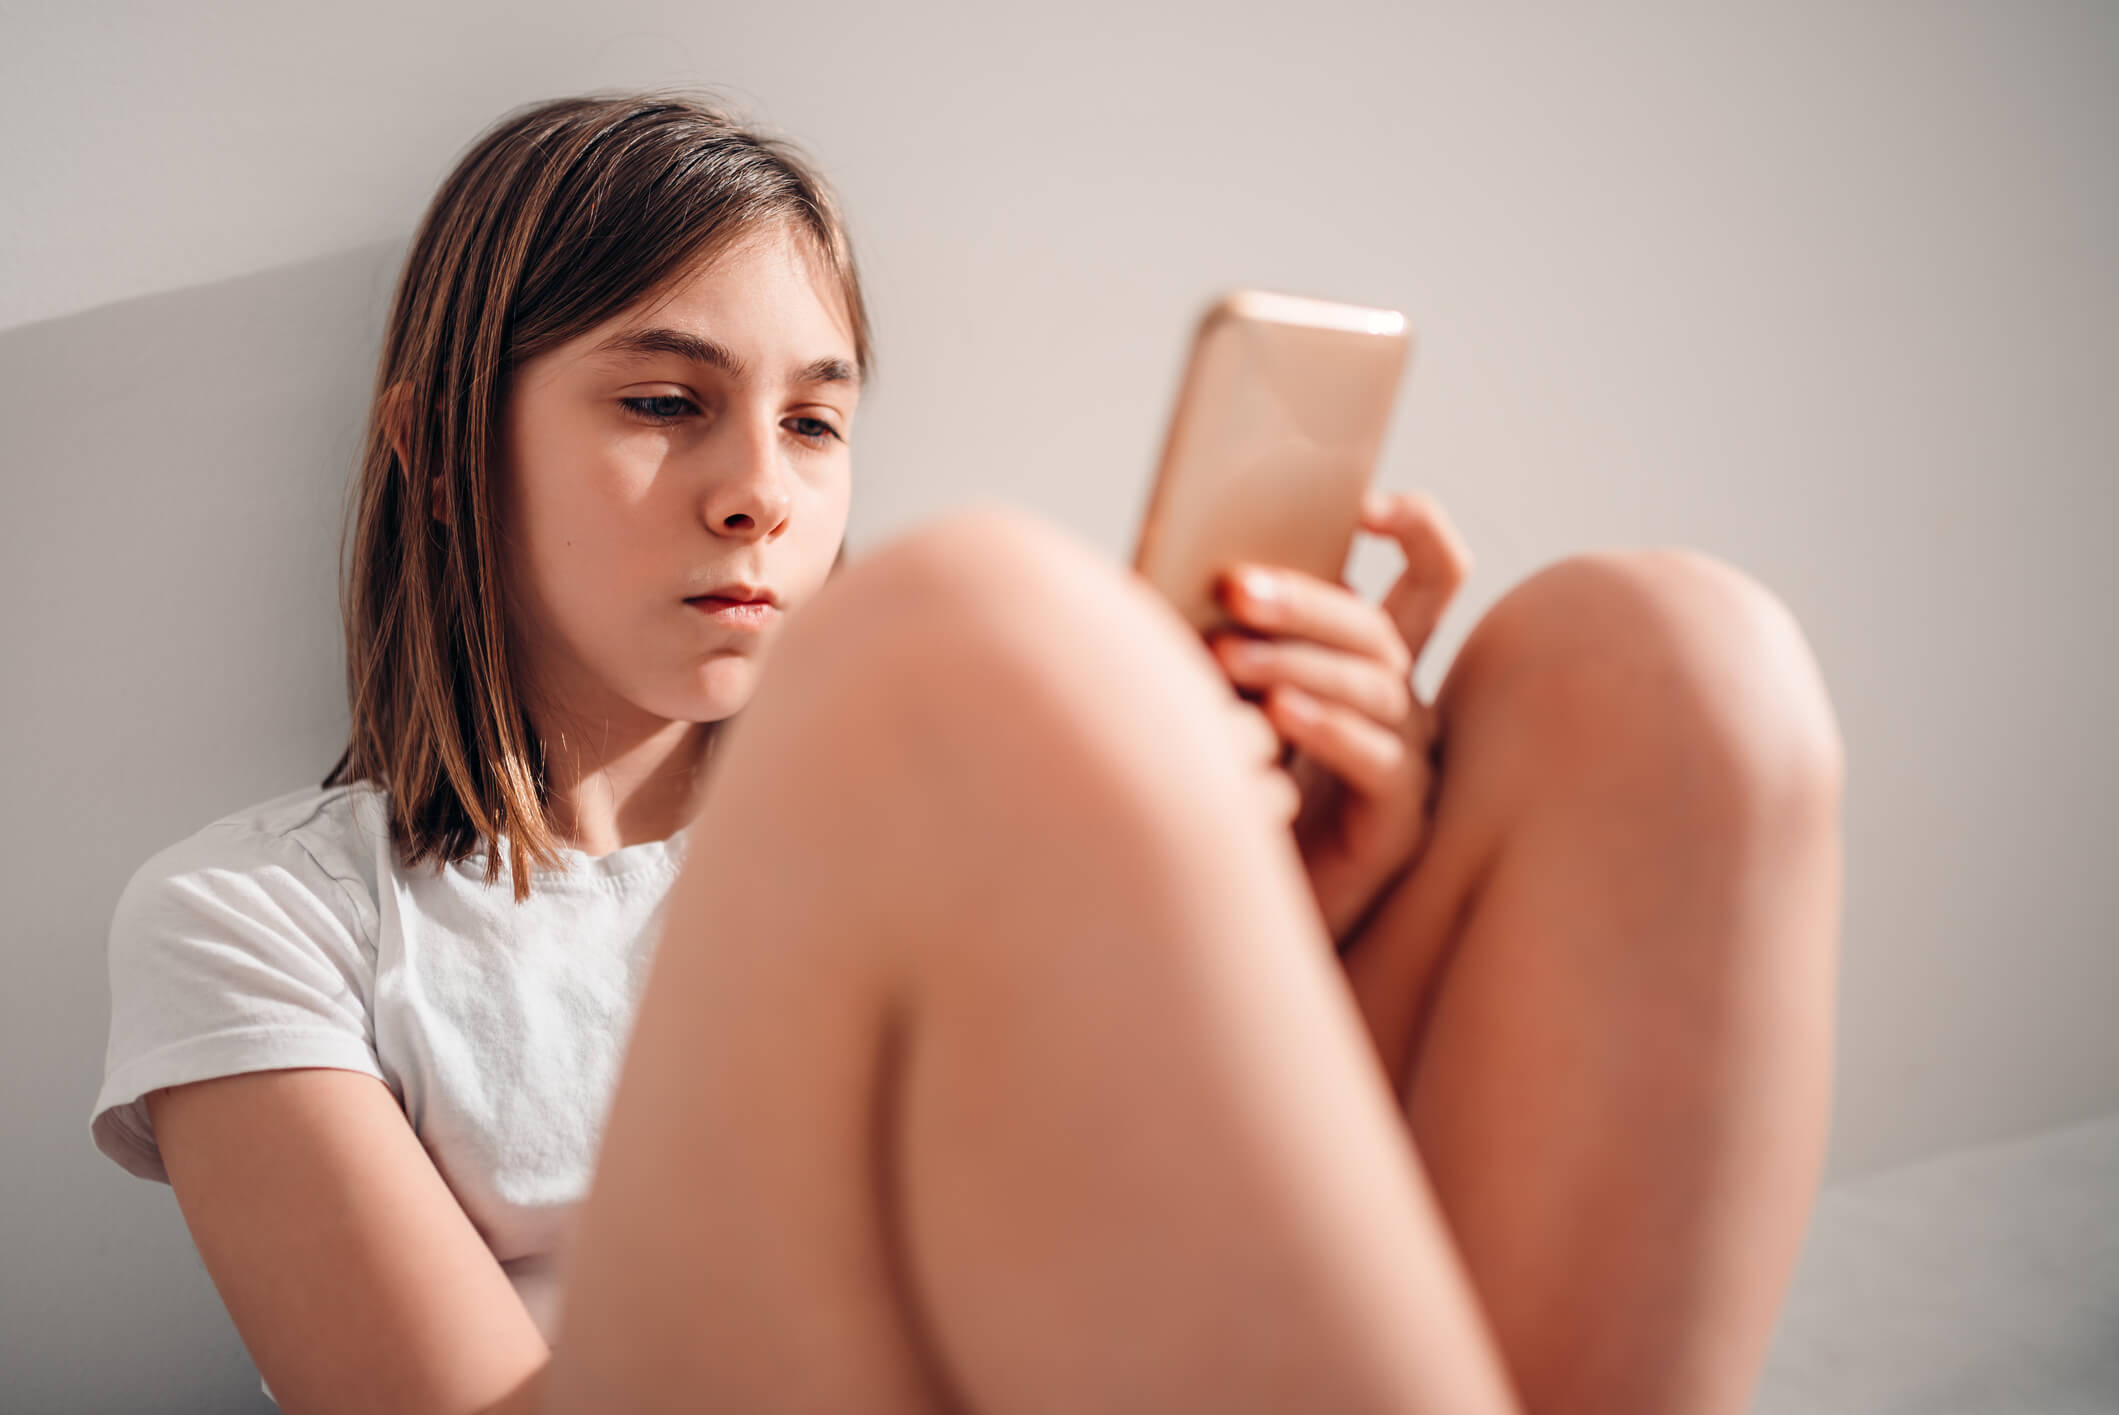 A young girl looks at her smartphone.